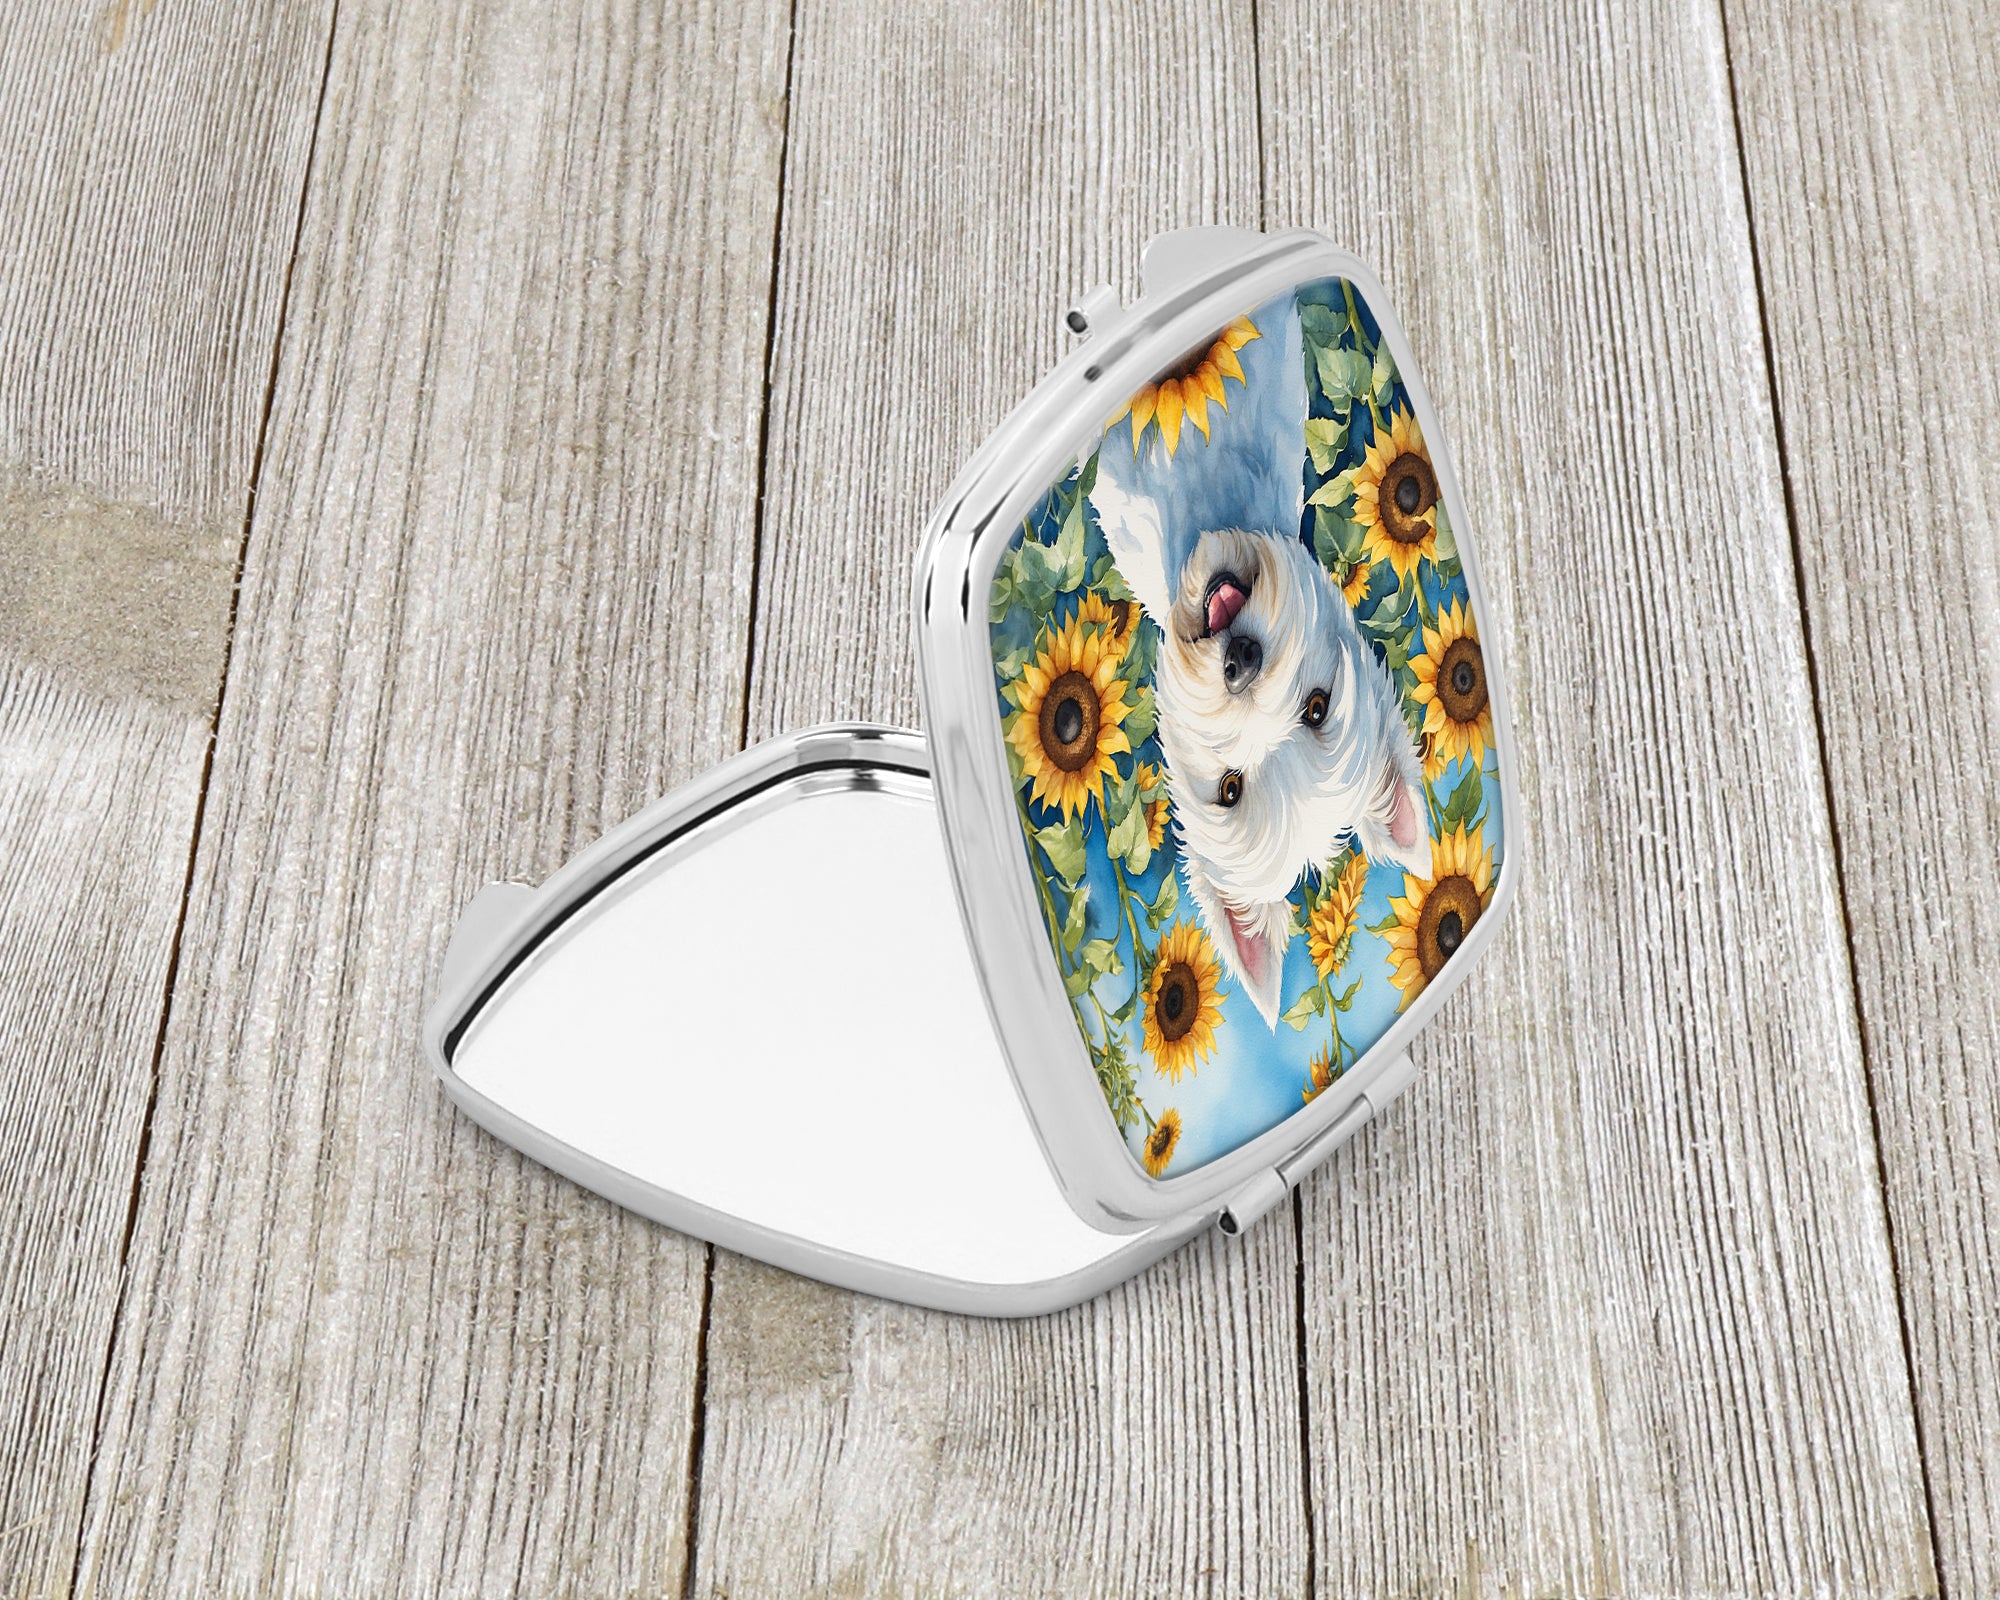 Buy this Westie in Sunflowers Compact Mirror